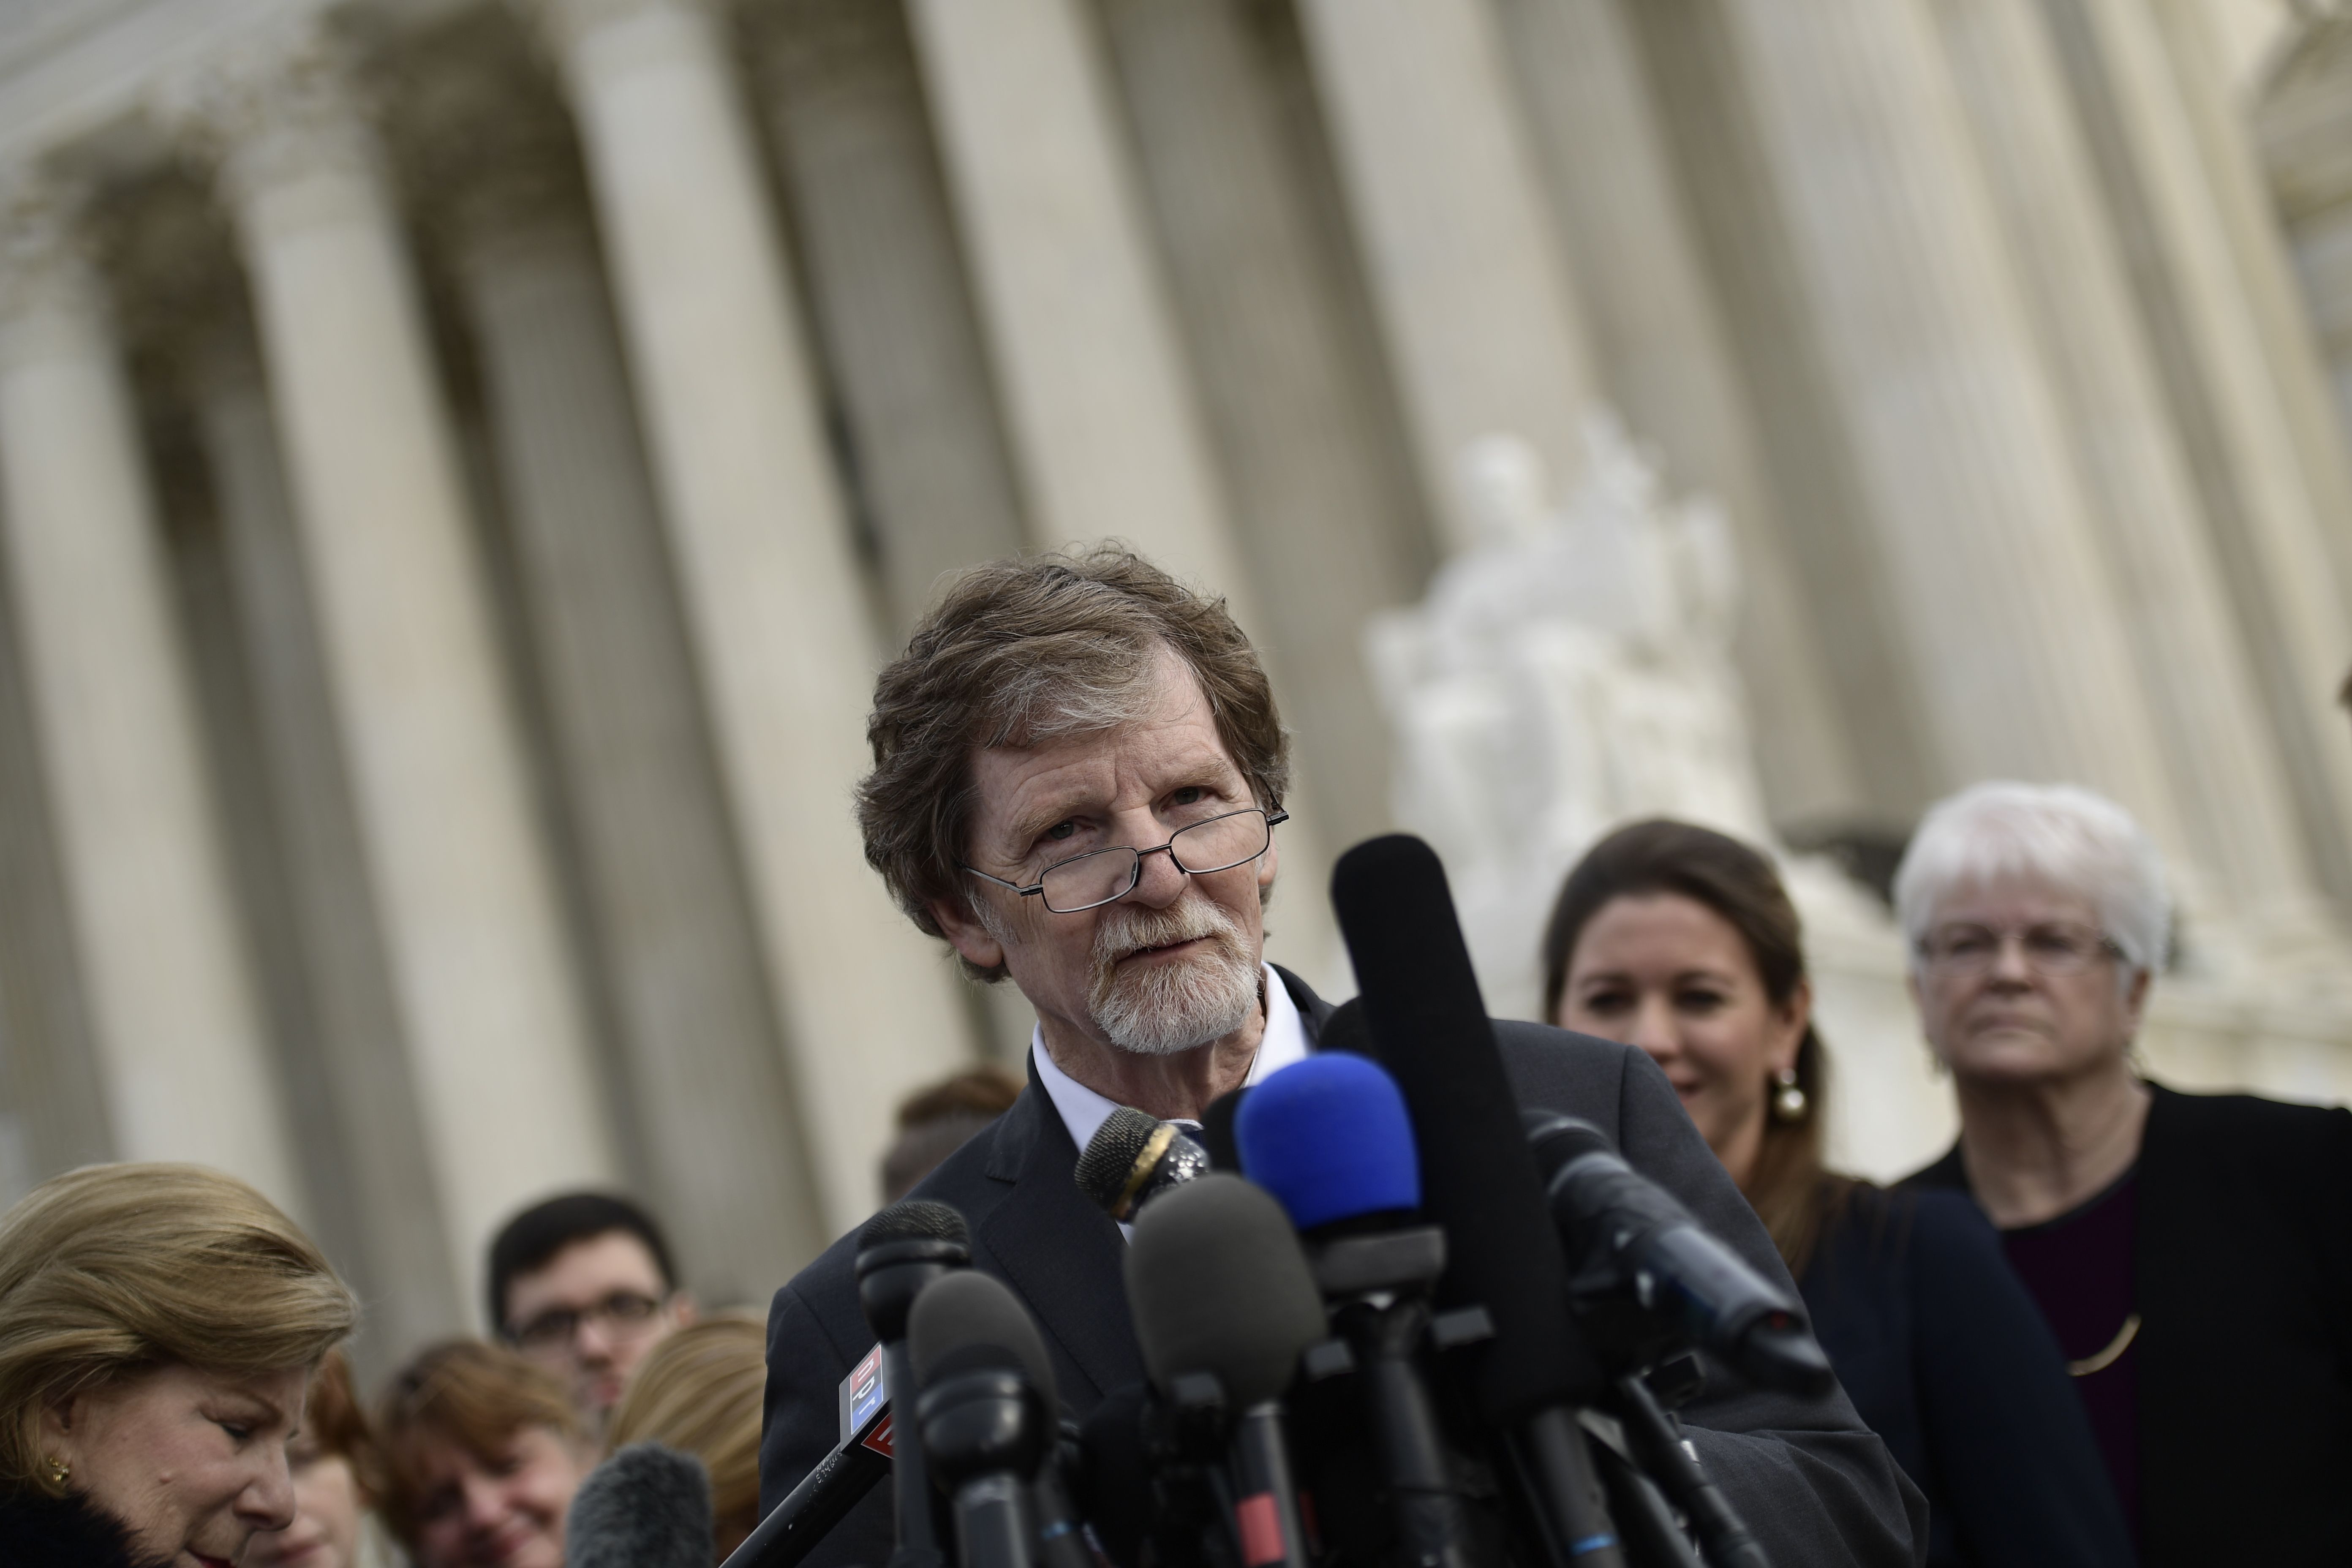 Jack Phillips, owner of "Masterpiece Cakeshop" in Lakewood, Colorado speaks outside the US Supreme Court as Masterpiece Cakeshop vs. Colorado Civil Rights Commission is heard on December 5, 2017 in Washington, DC. (BRENDAN SMIALOWSKI/AFP via Getty Images)